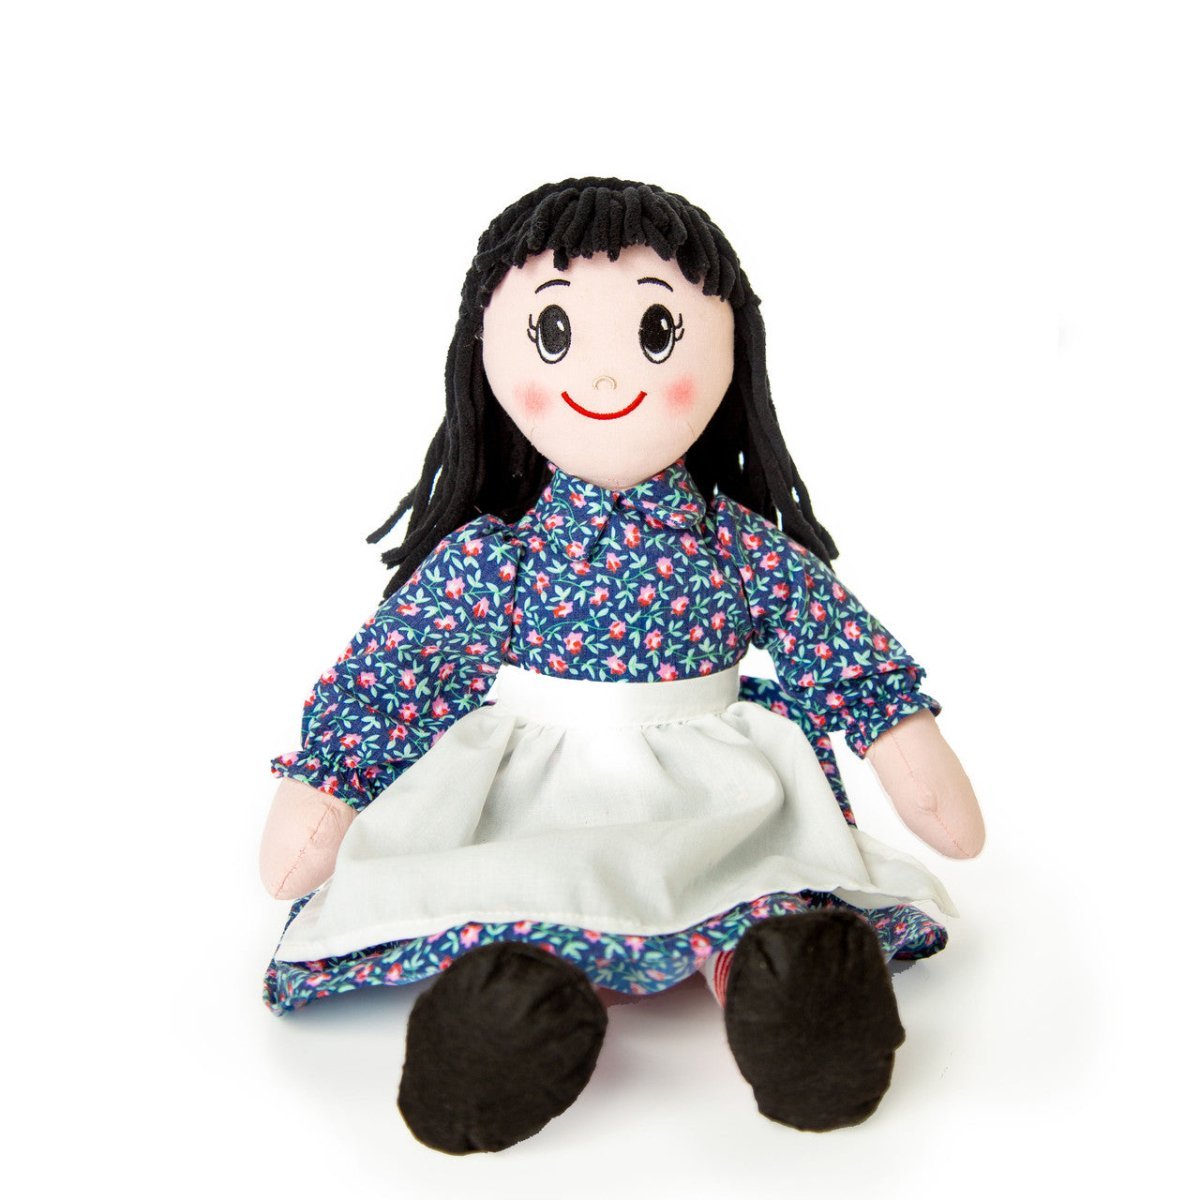 Queen's Treasures 18 Inch Little House on the Prairie "Charlotte" Rag Doll - Simon's Collectibles